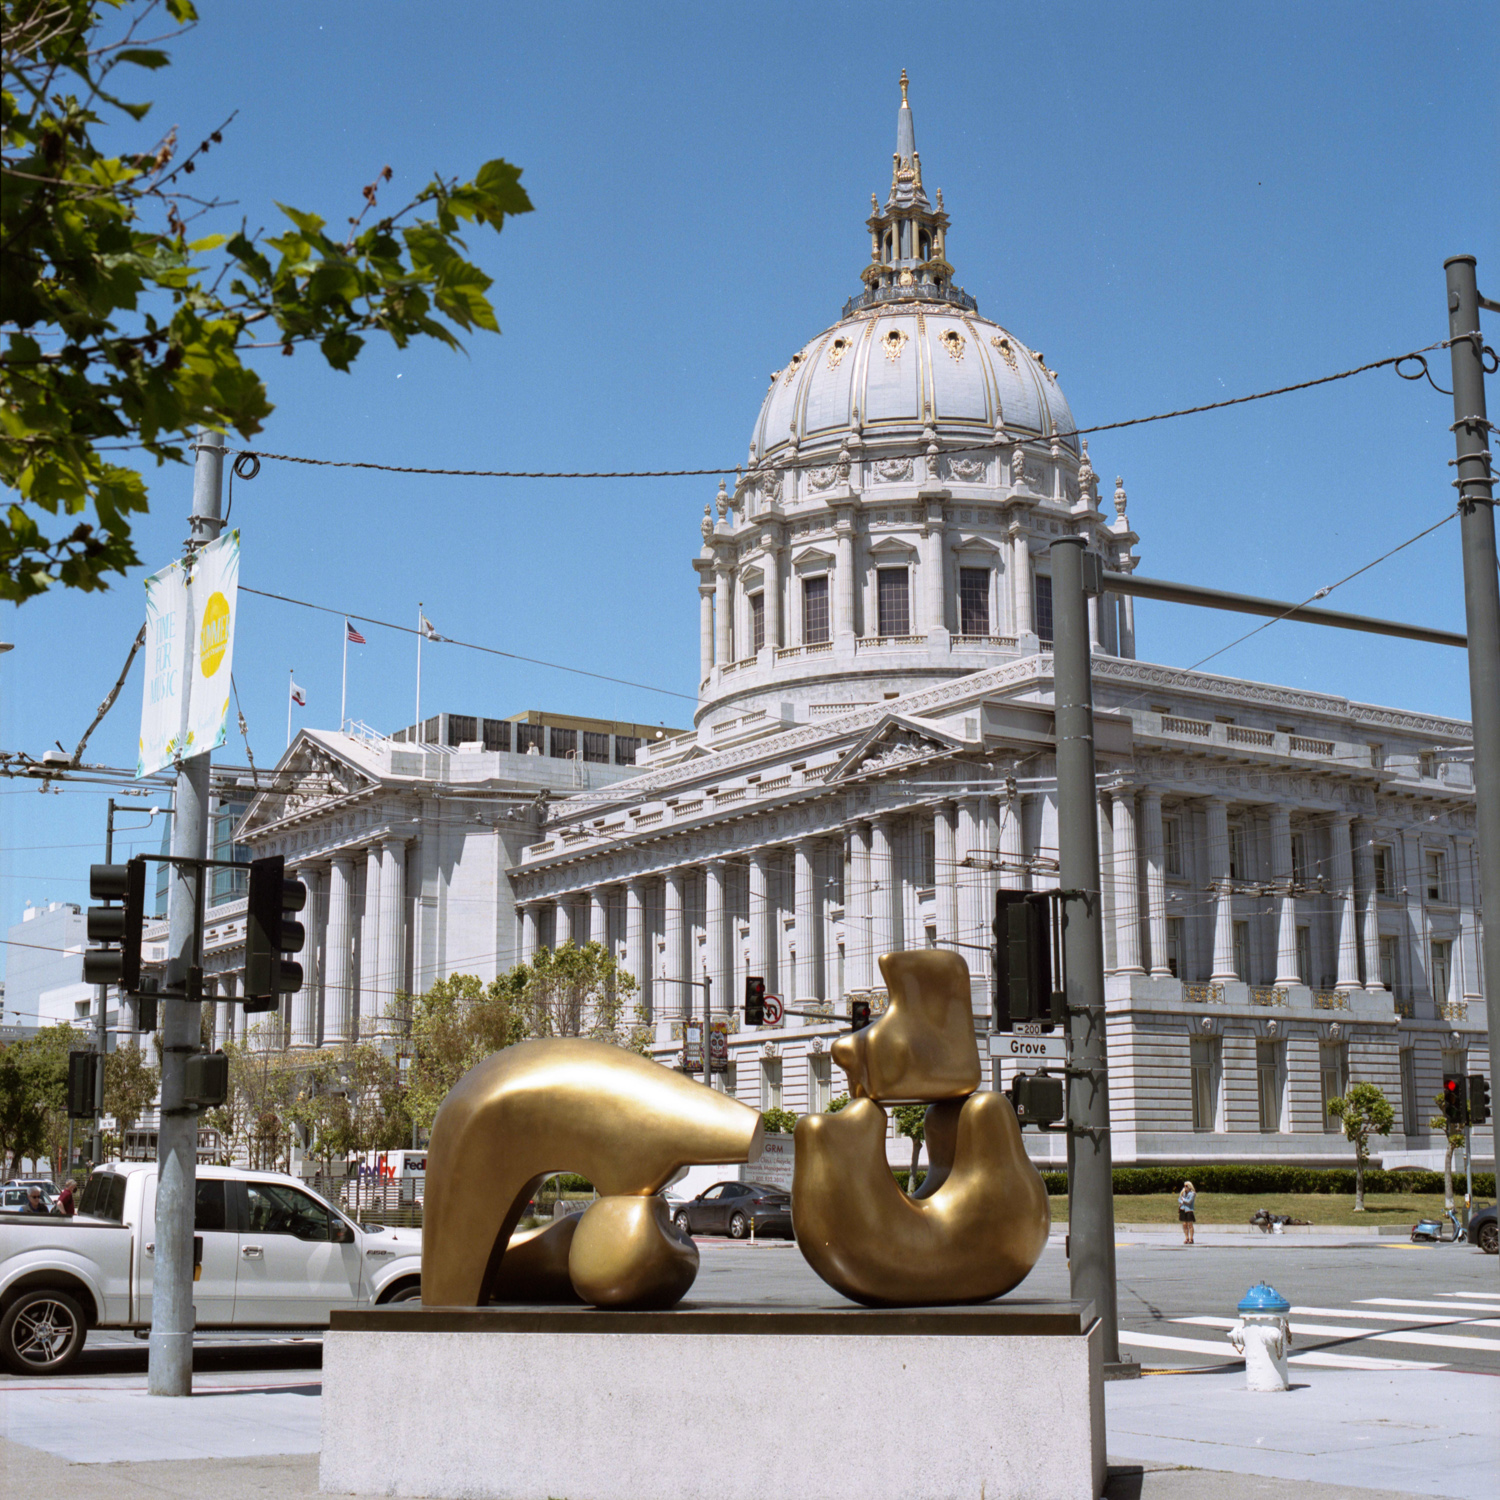 San Francisco Symphony Hall Morris statue on the street, image by author